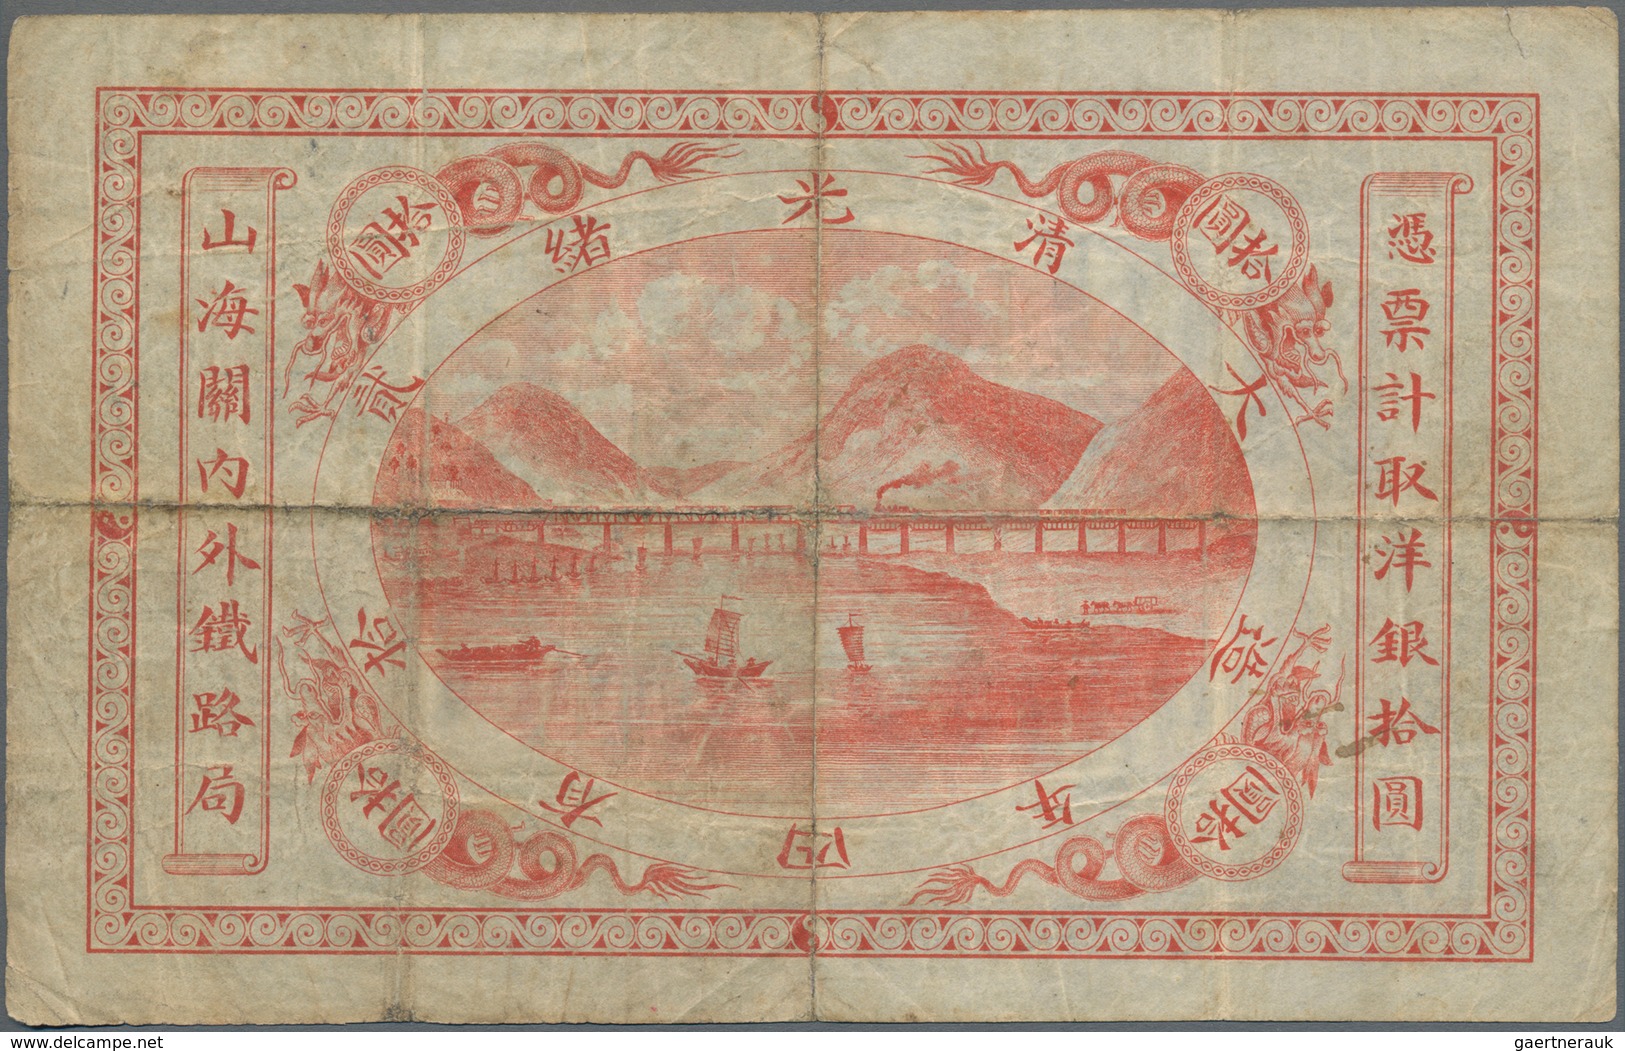 China: Imperial Chinese Railways, Shanghai Branch 10 Dollars January 2nd 1899, P.A61, Extraordinary - China